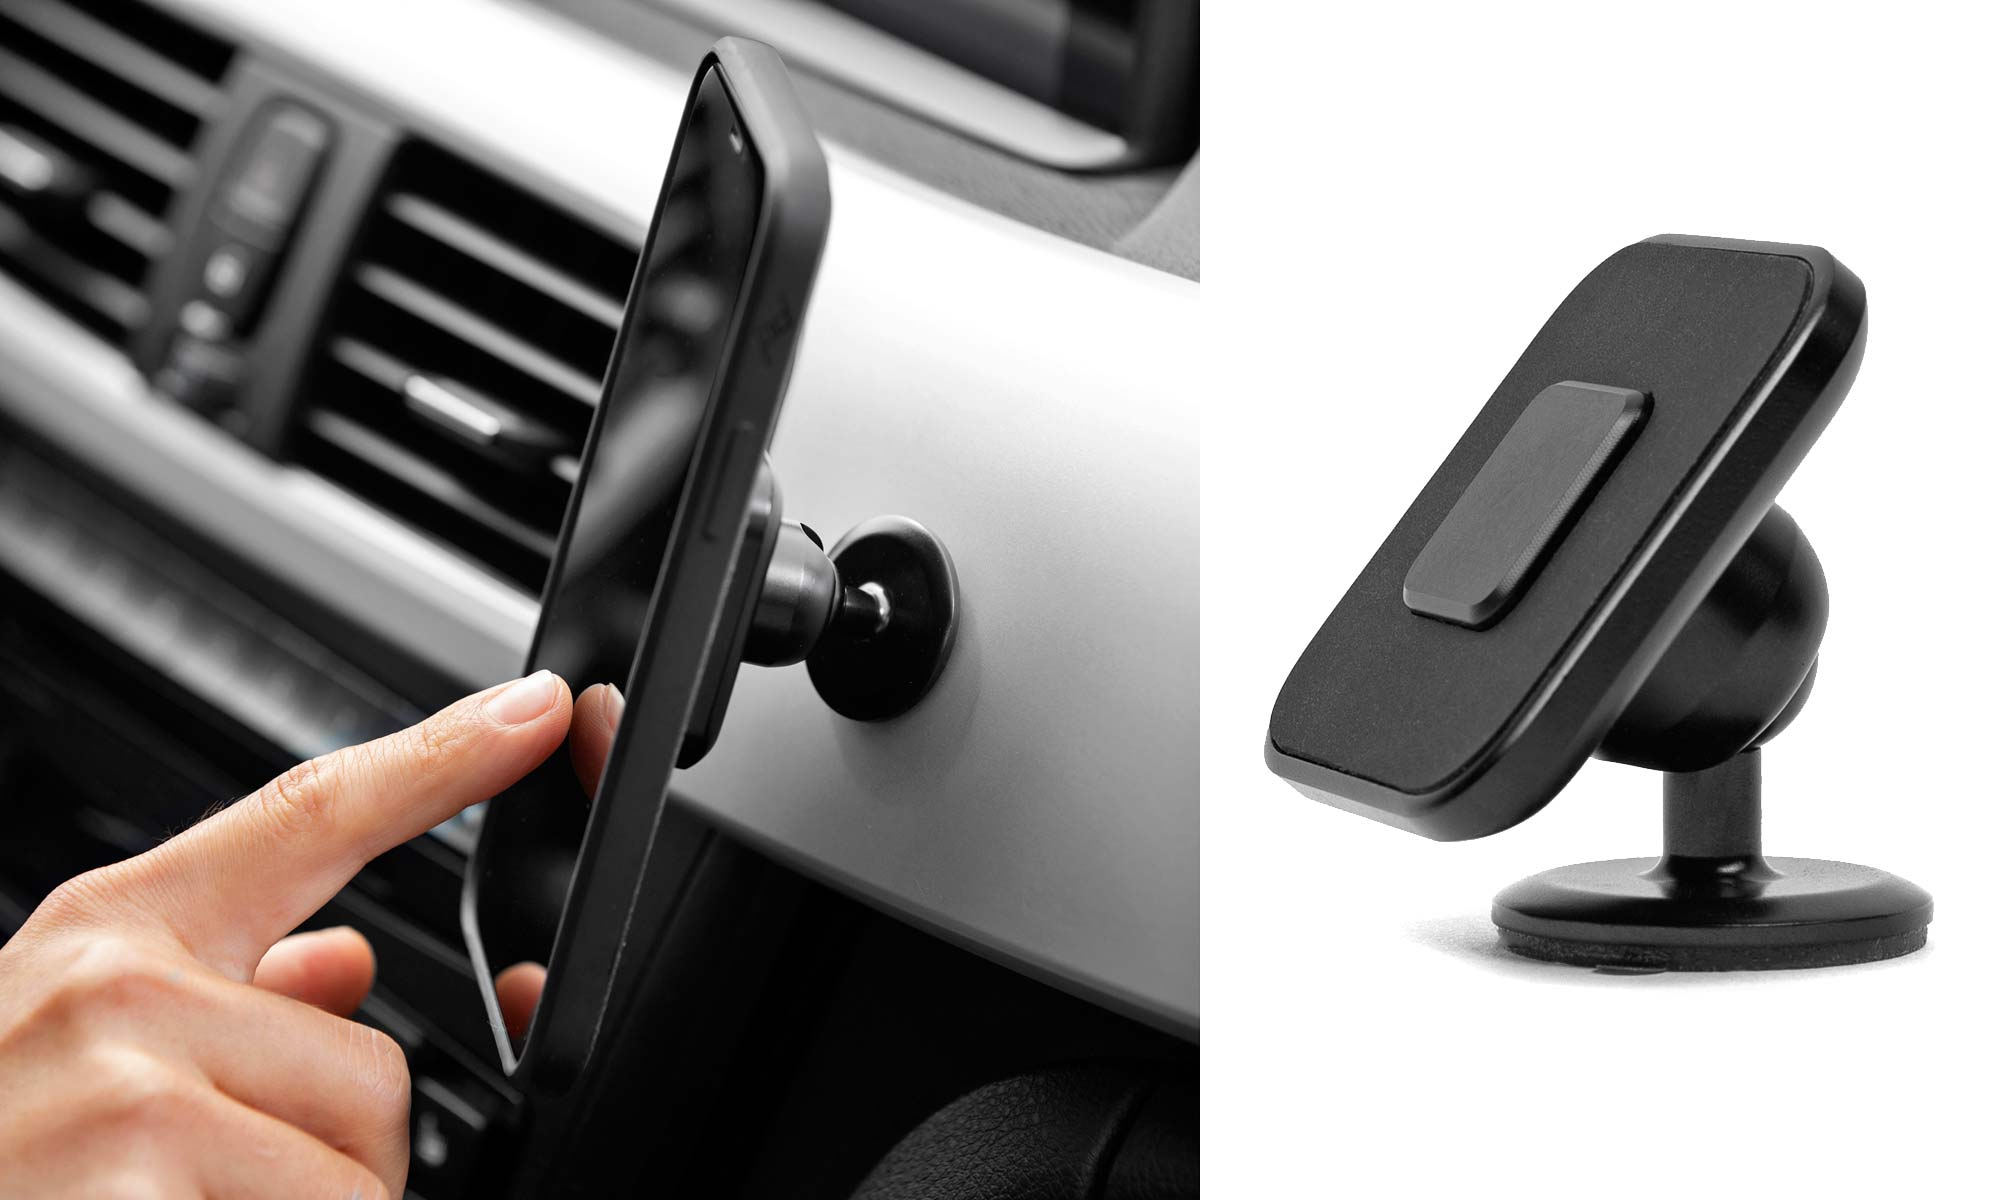 Mobile by Peak Design phone case and mounts, magnetic and secure locking mobile phone bike mounts everyday case charging adapters, car mounts